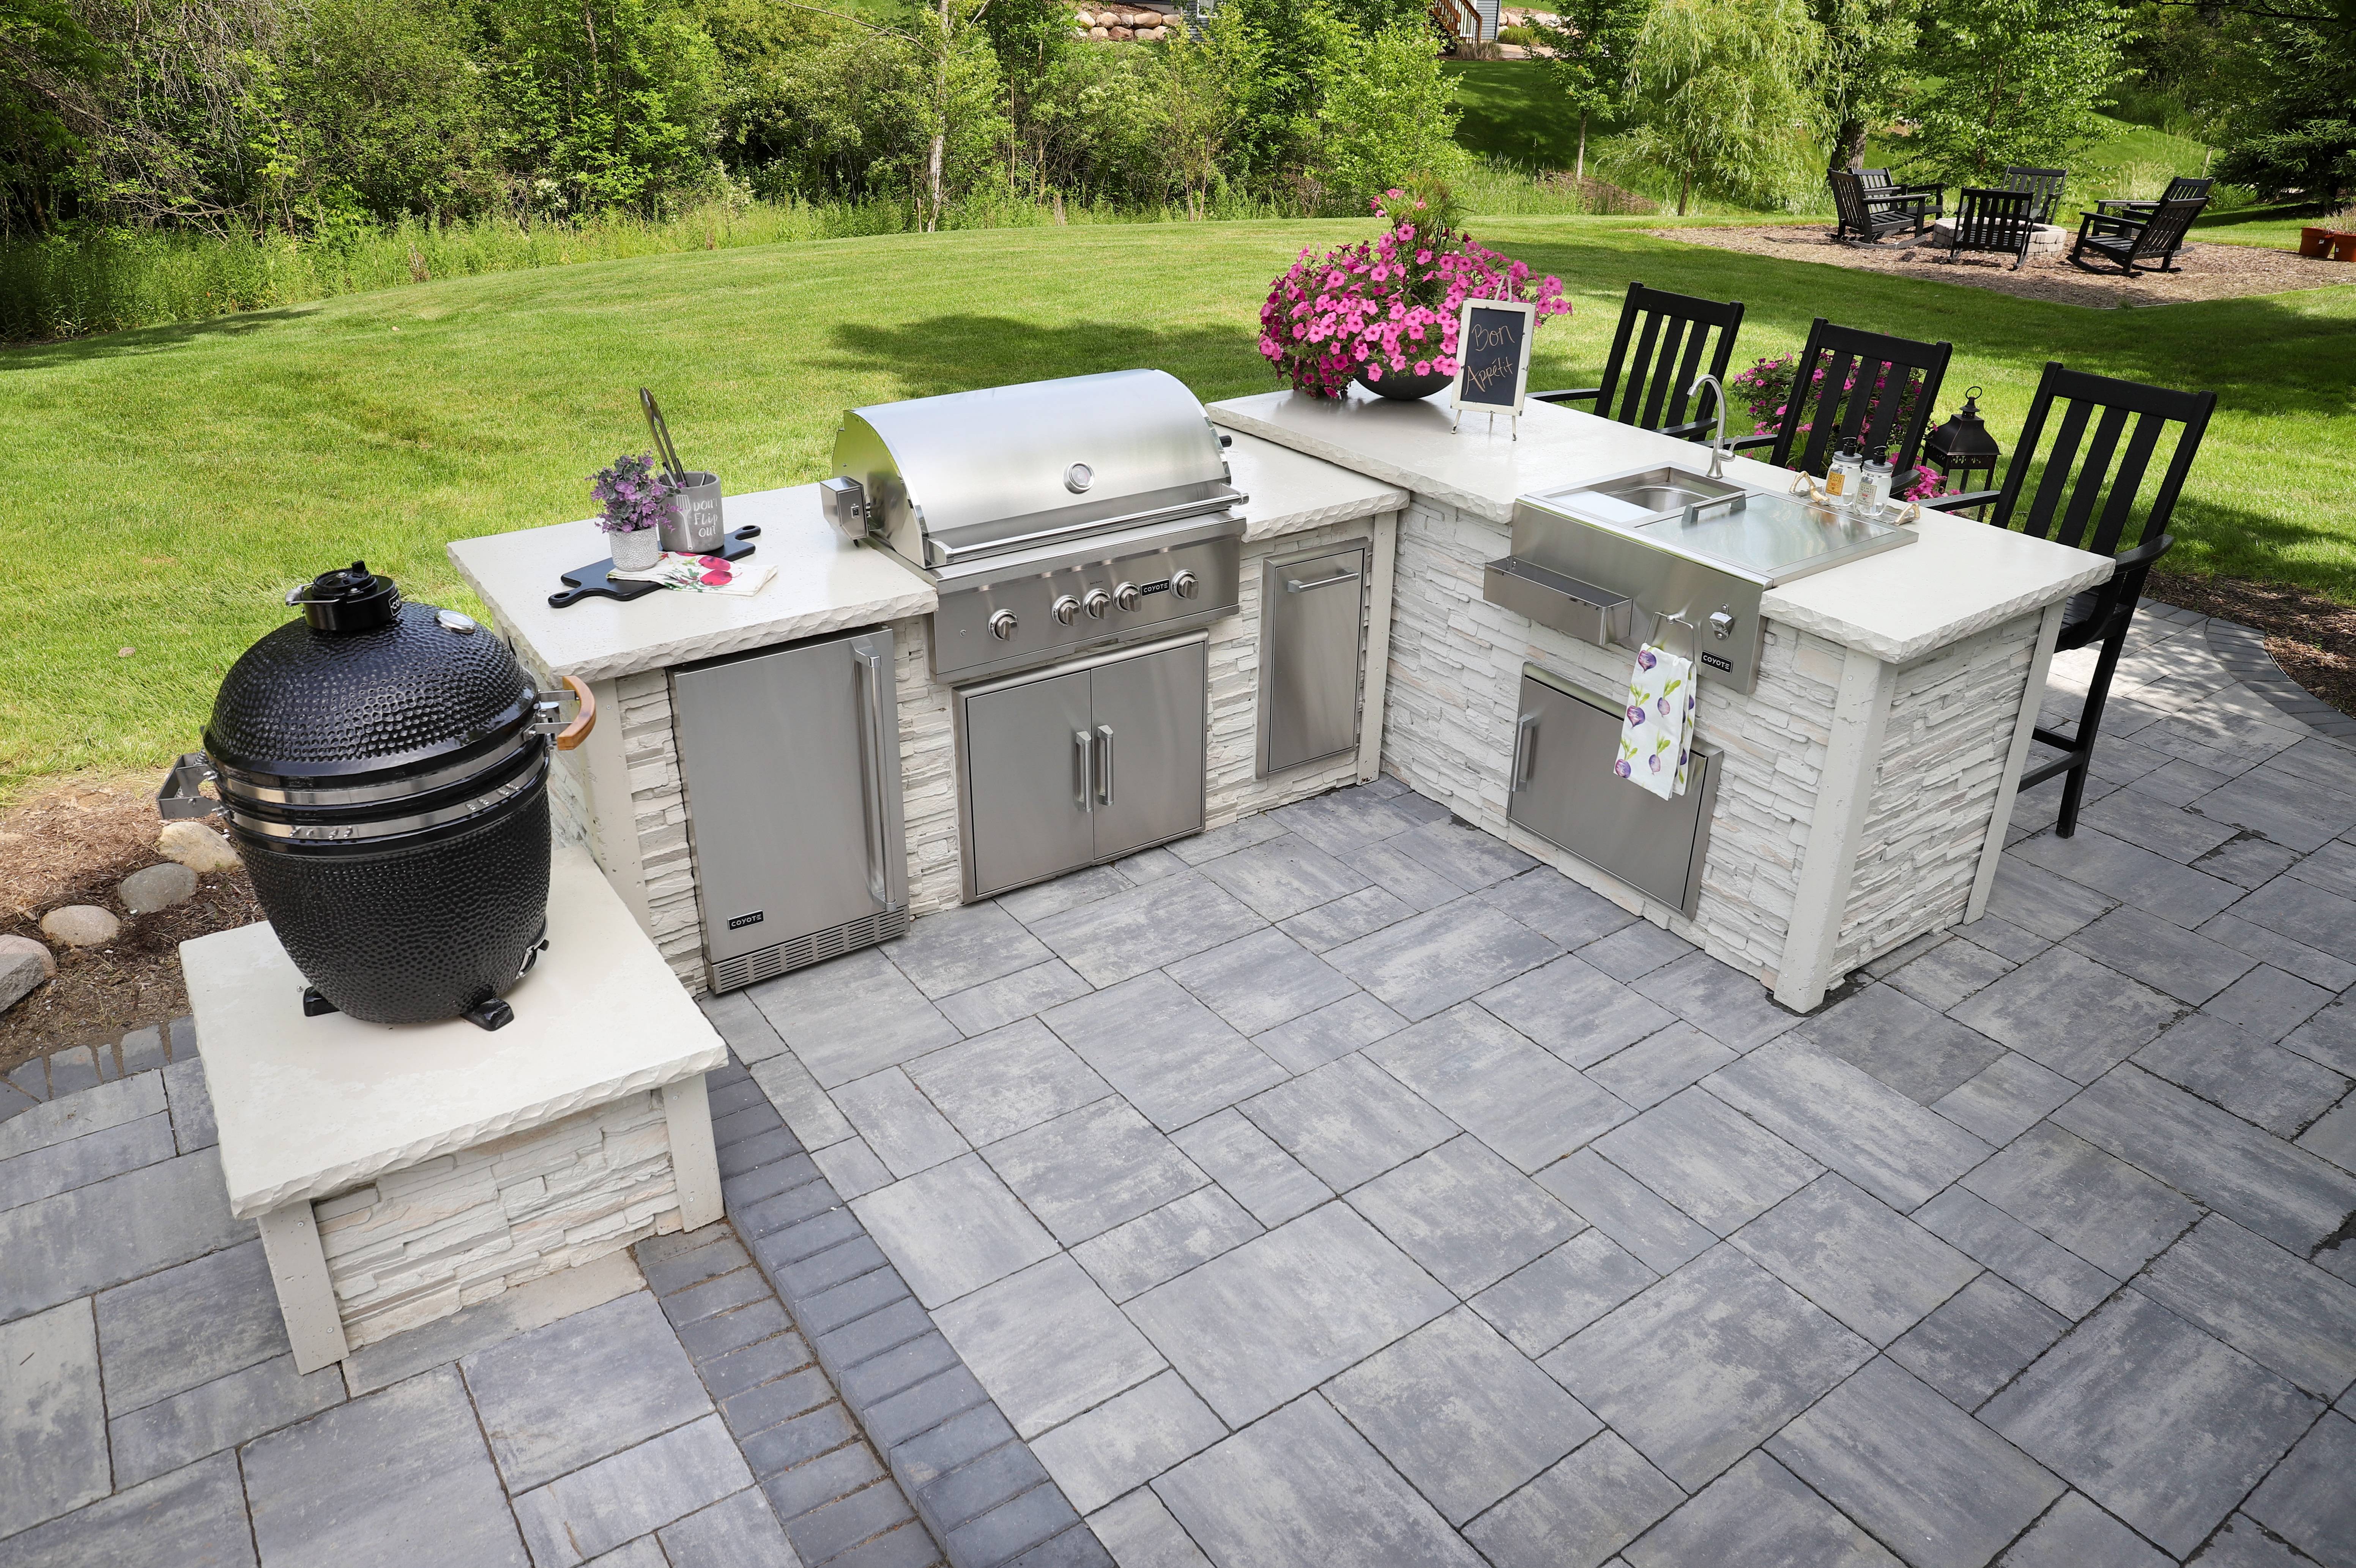 Outdoor Kitchen Must-haves for cooking al fresco